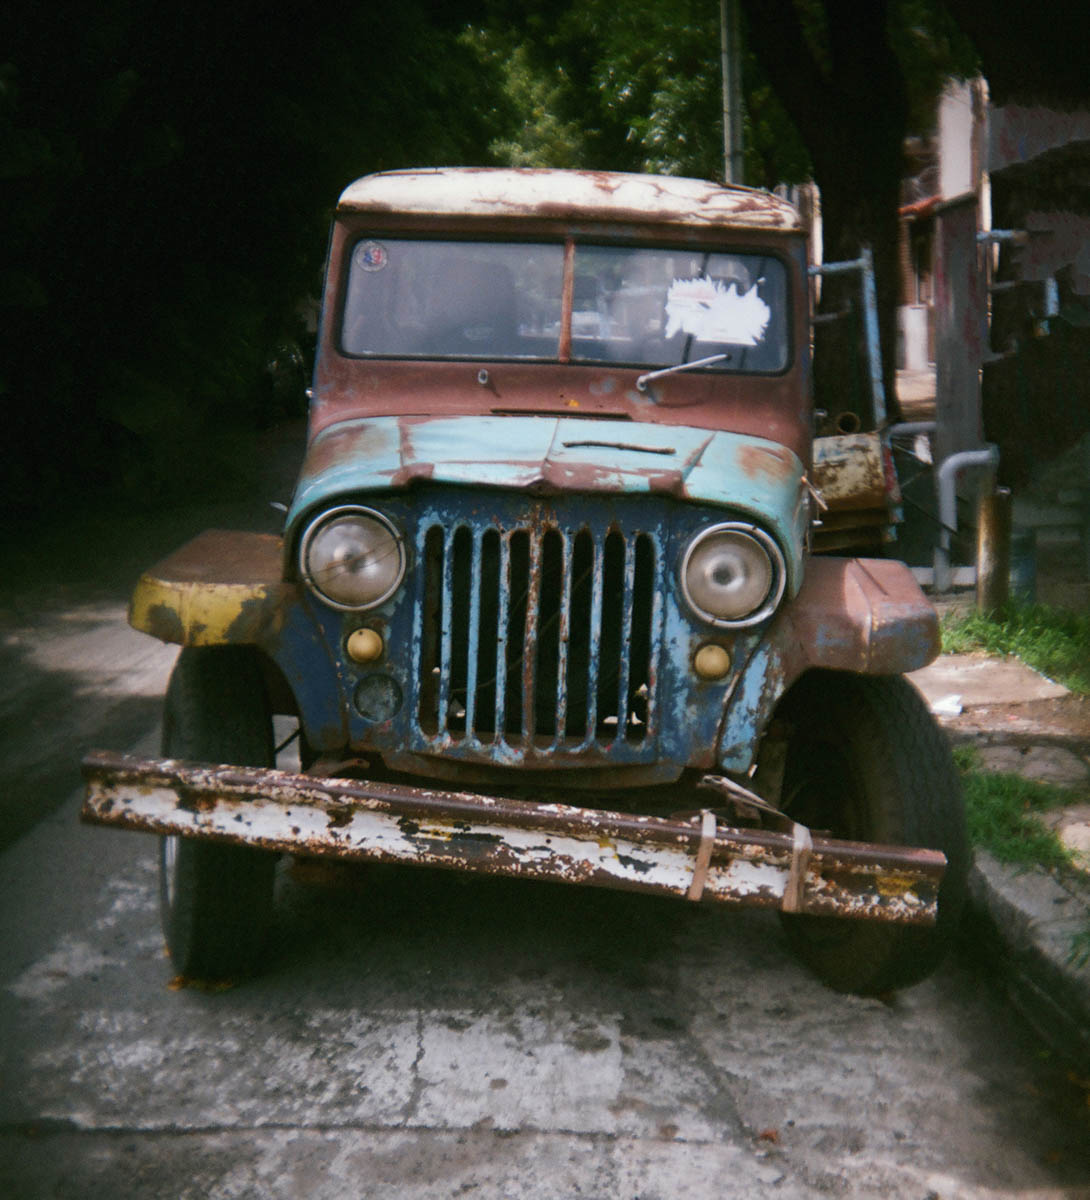 An old Jeep-imitation vehicle (known as an “Estanciera”) parked in a neighborhood street in Buenos Aires. Holga 135BC slightly cropped, Lomo 400 negative film.